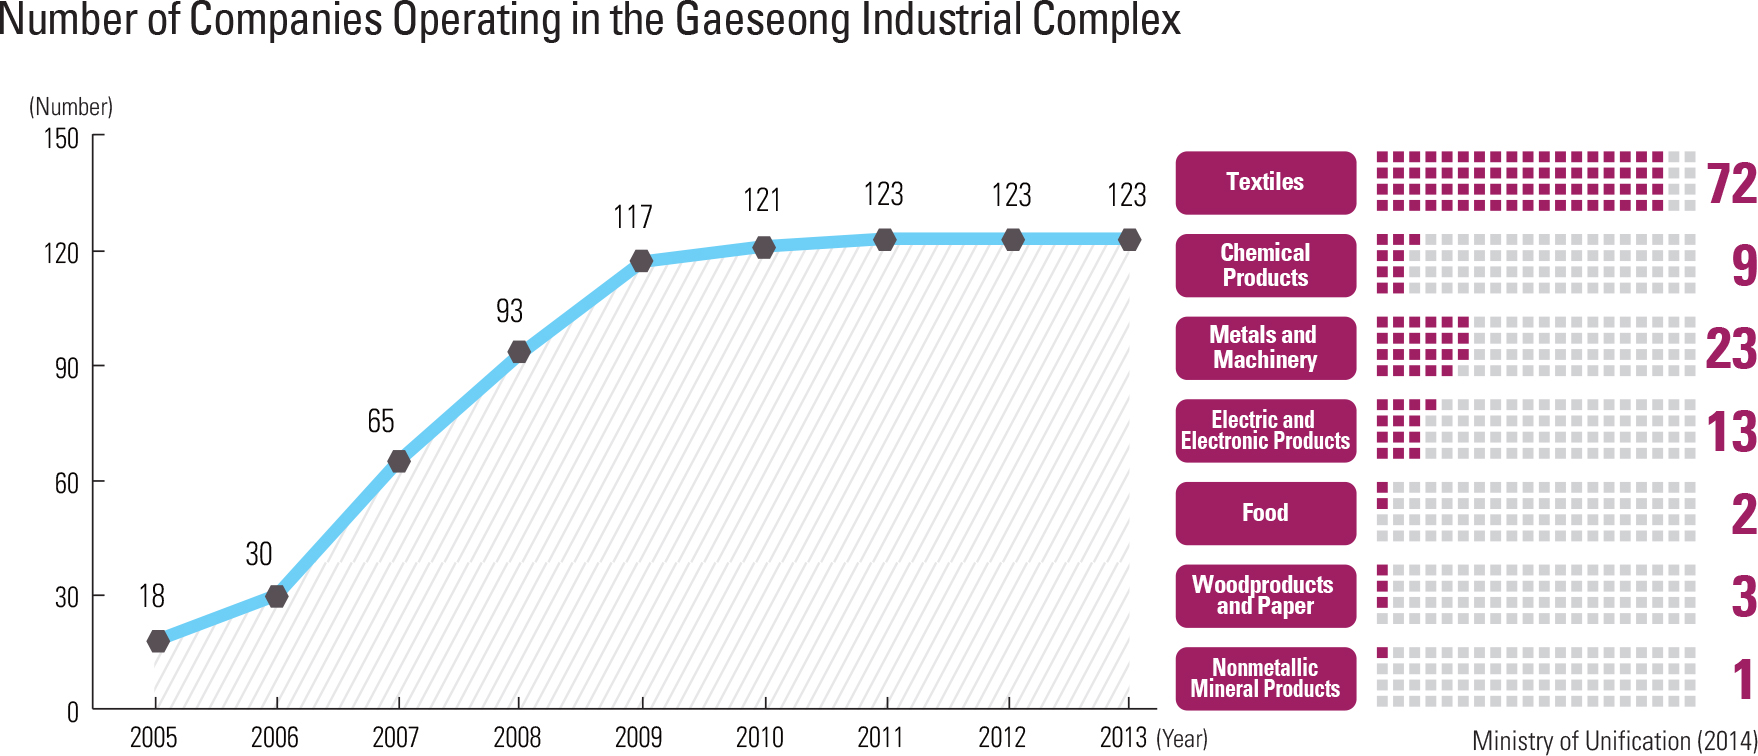 Number of Companies Operating in the Gaeseong Industrial Complex